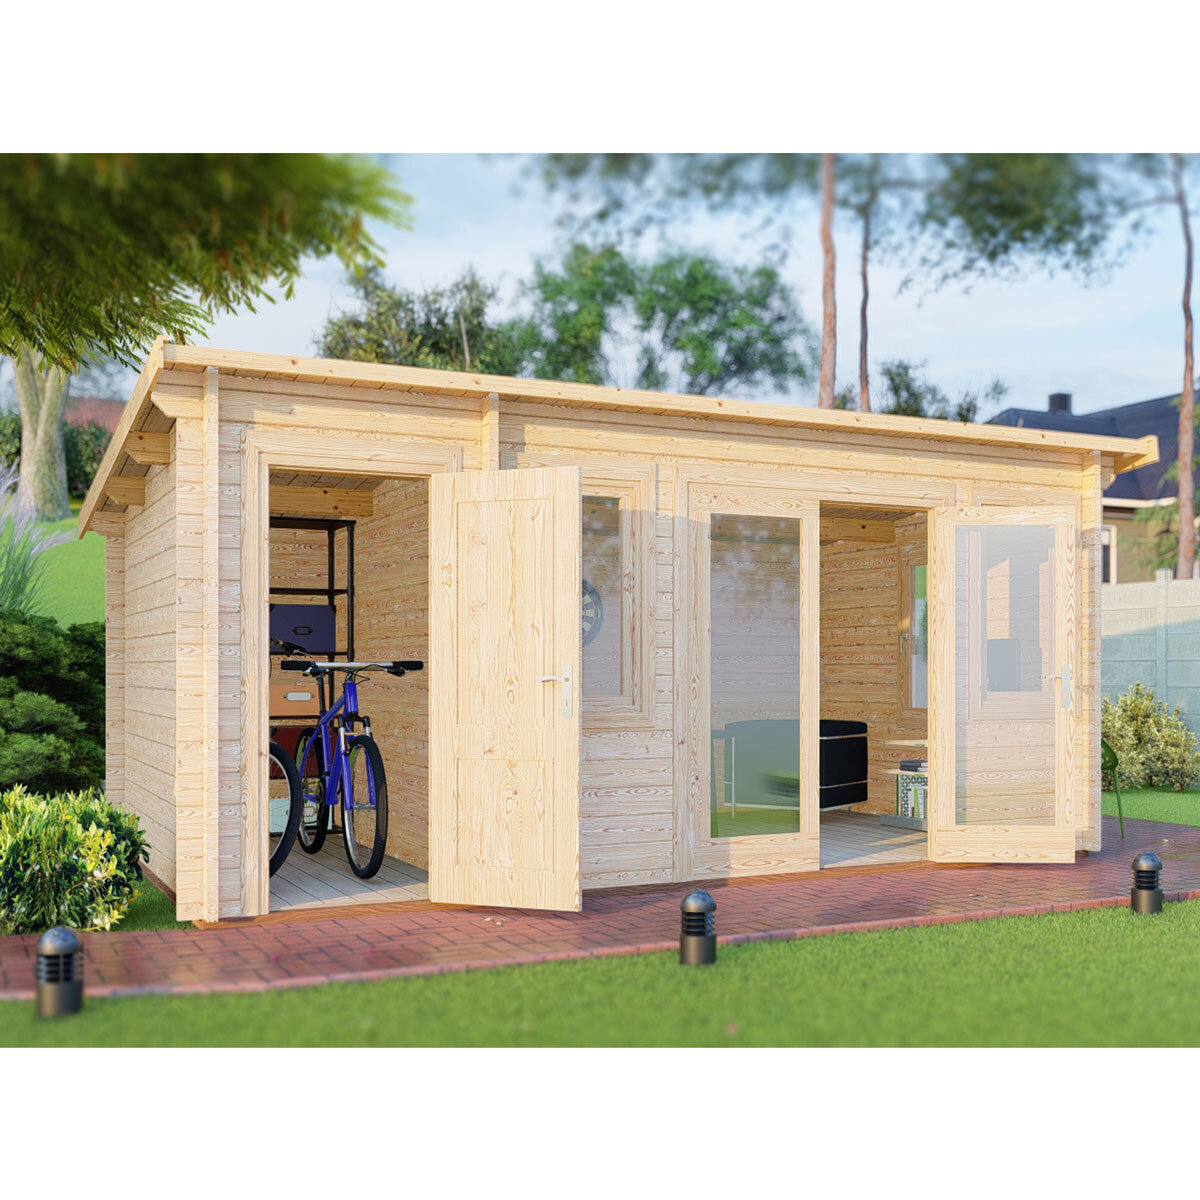 Shire Rydal 44mm Log Cabin 17 x 10ft (5.1 x 3m)